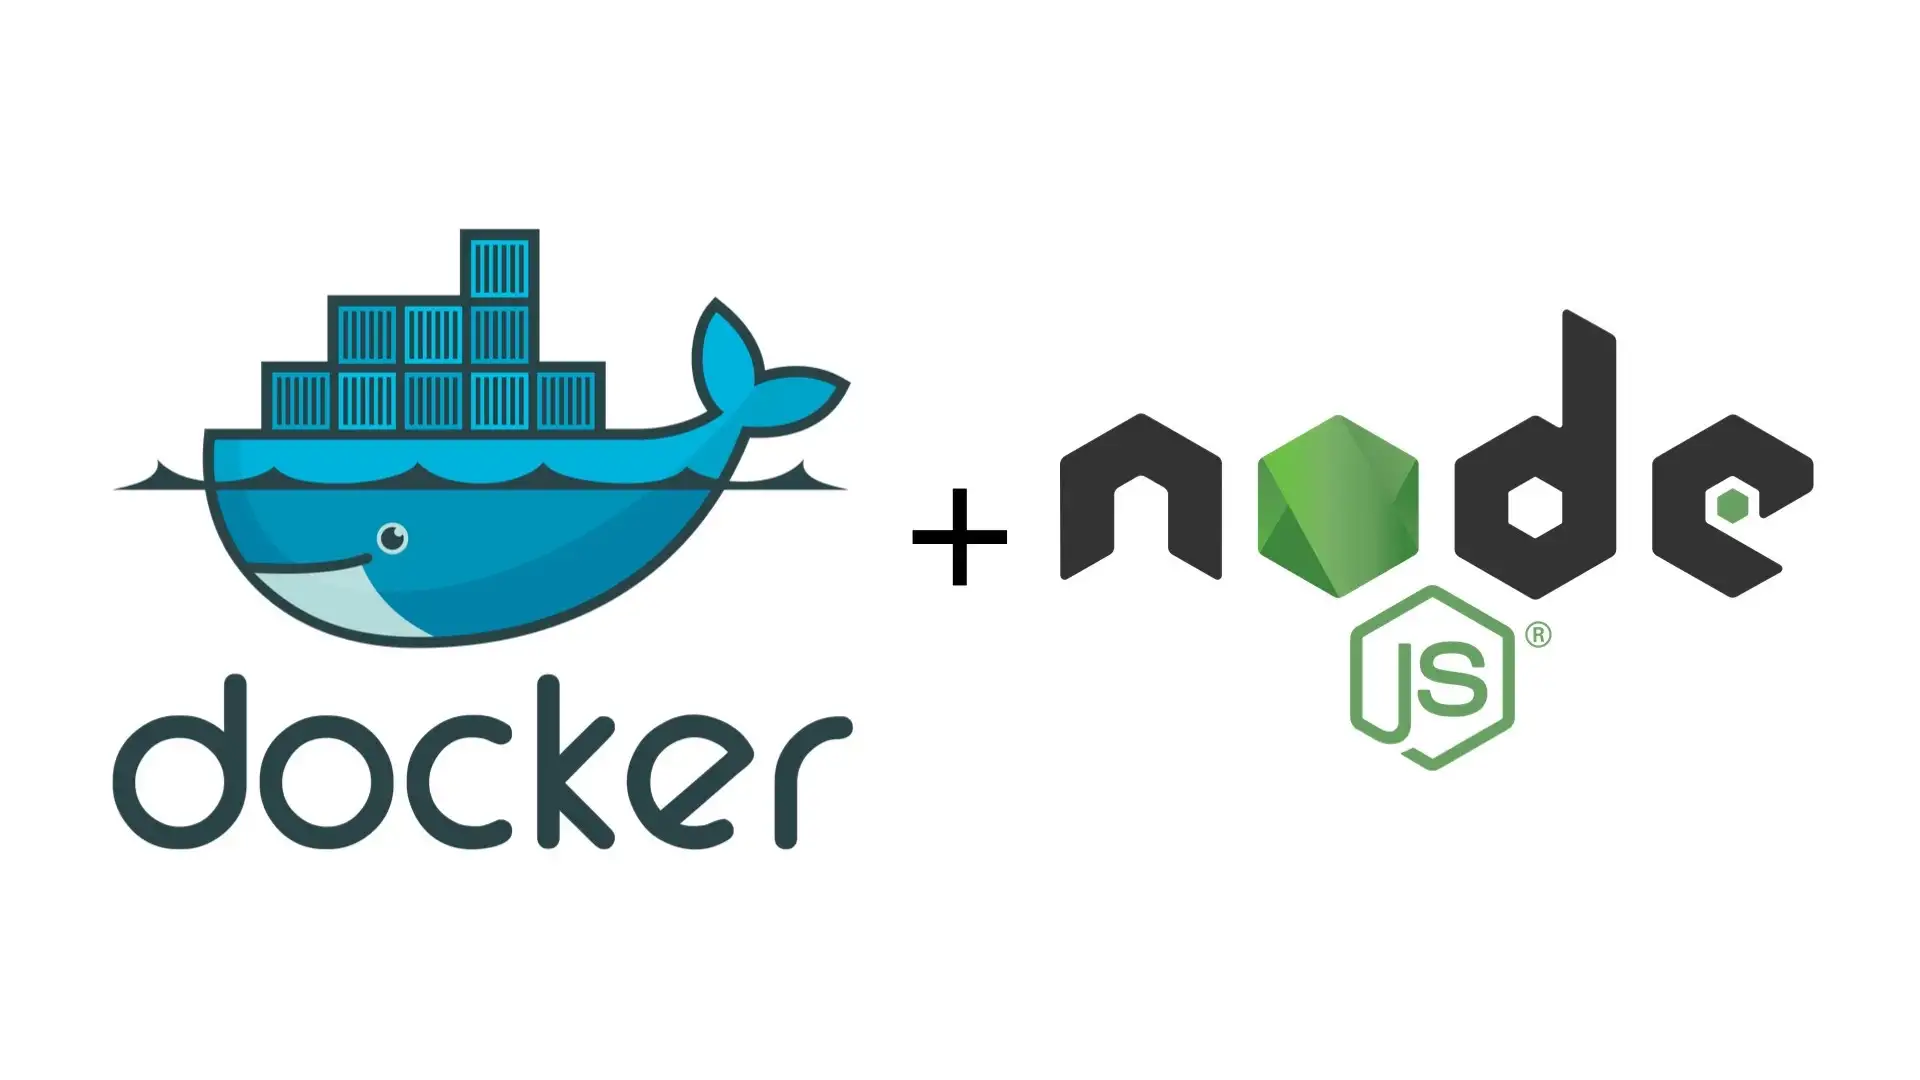 How to Package a Node.js Application with Docker